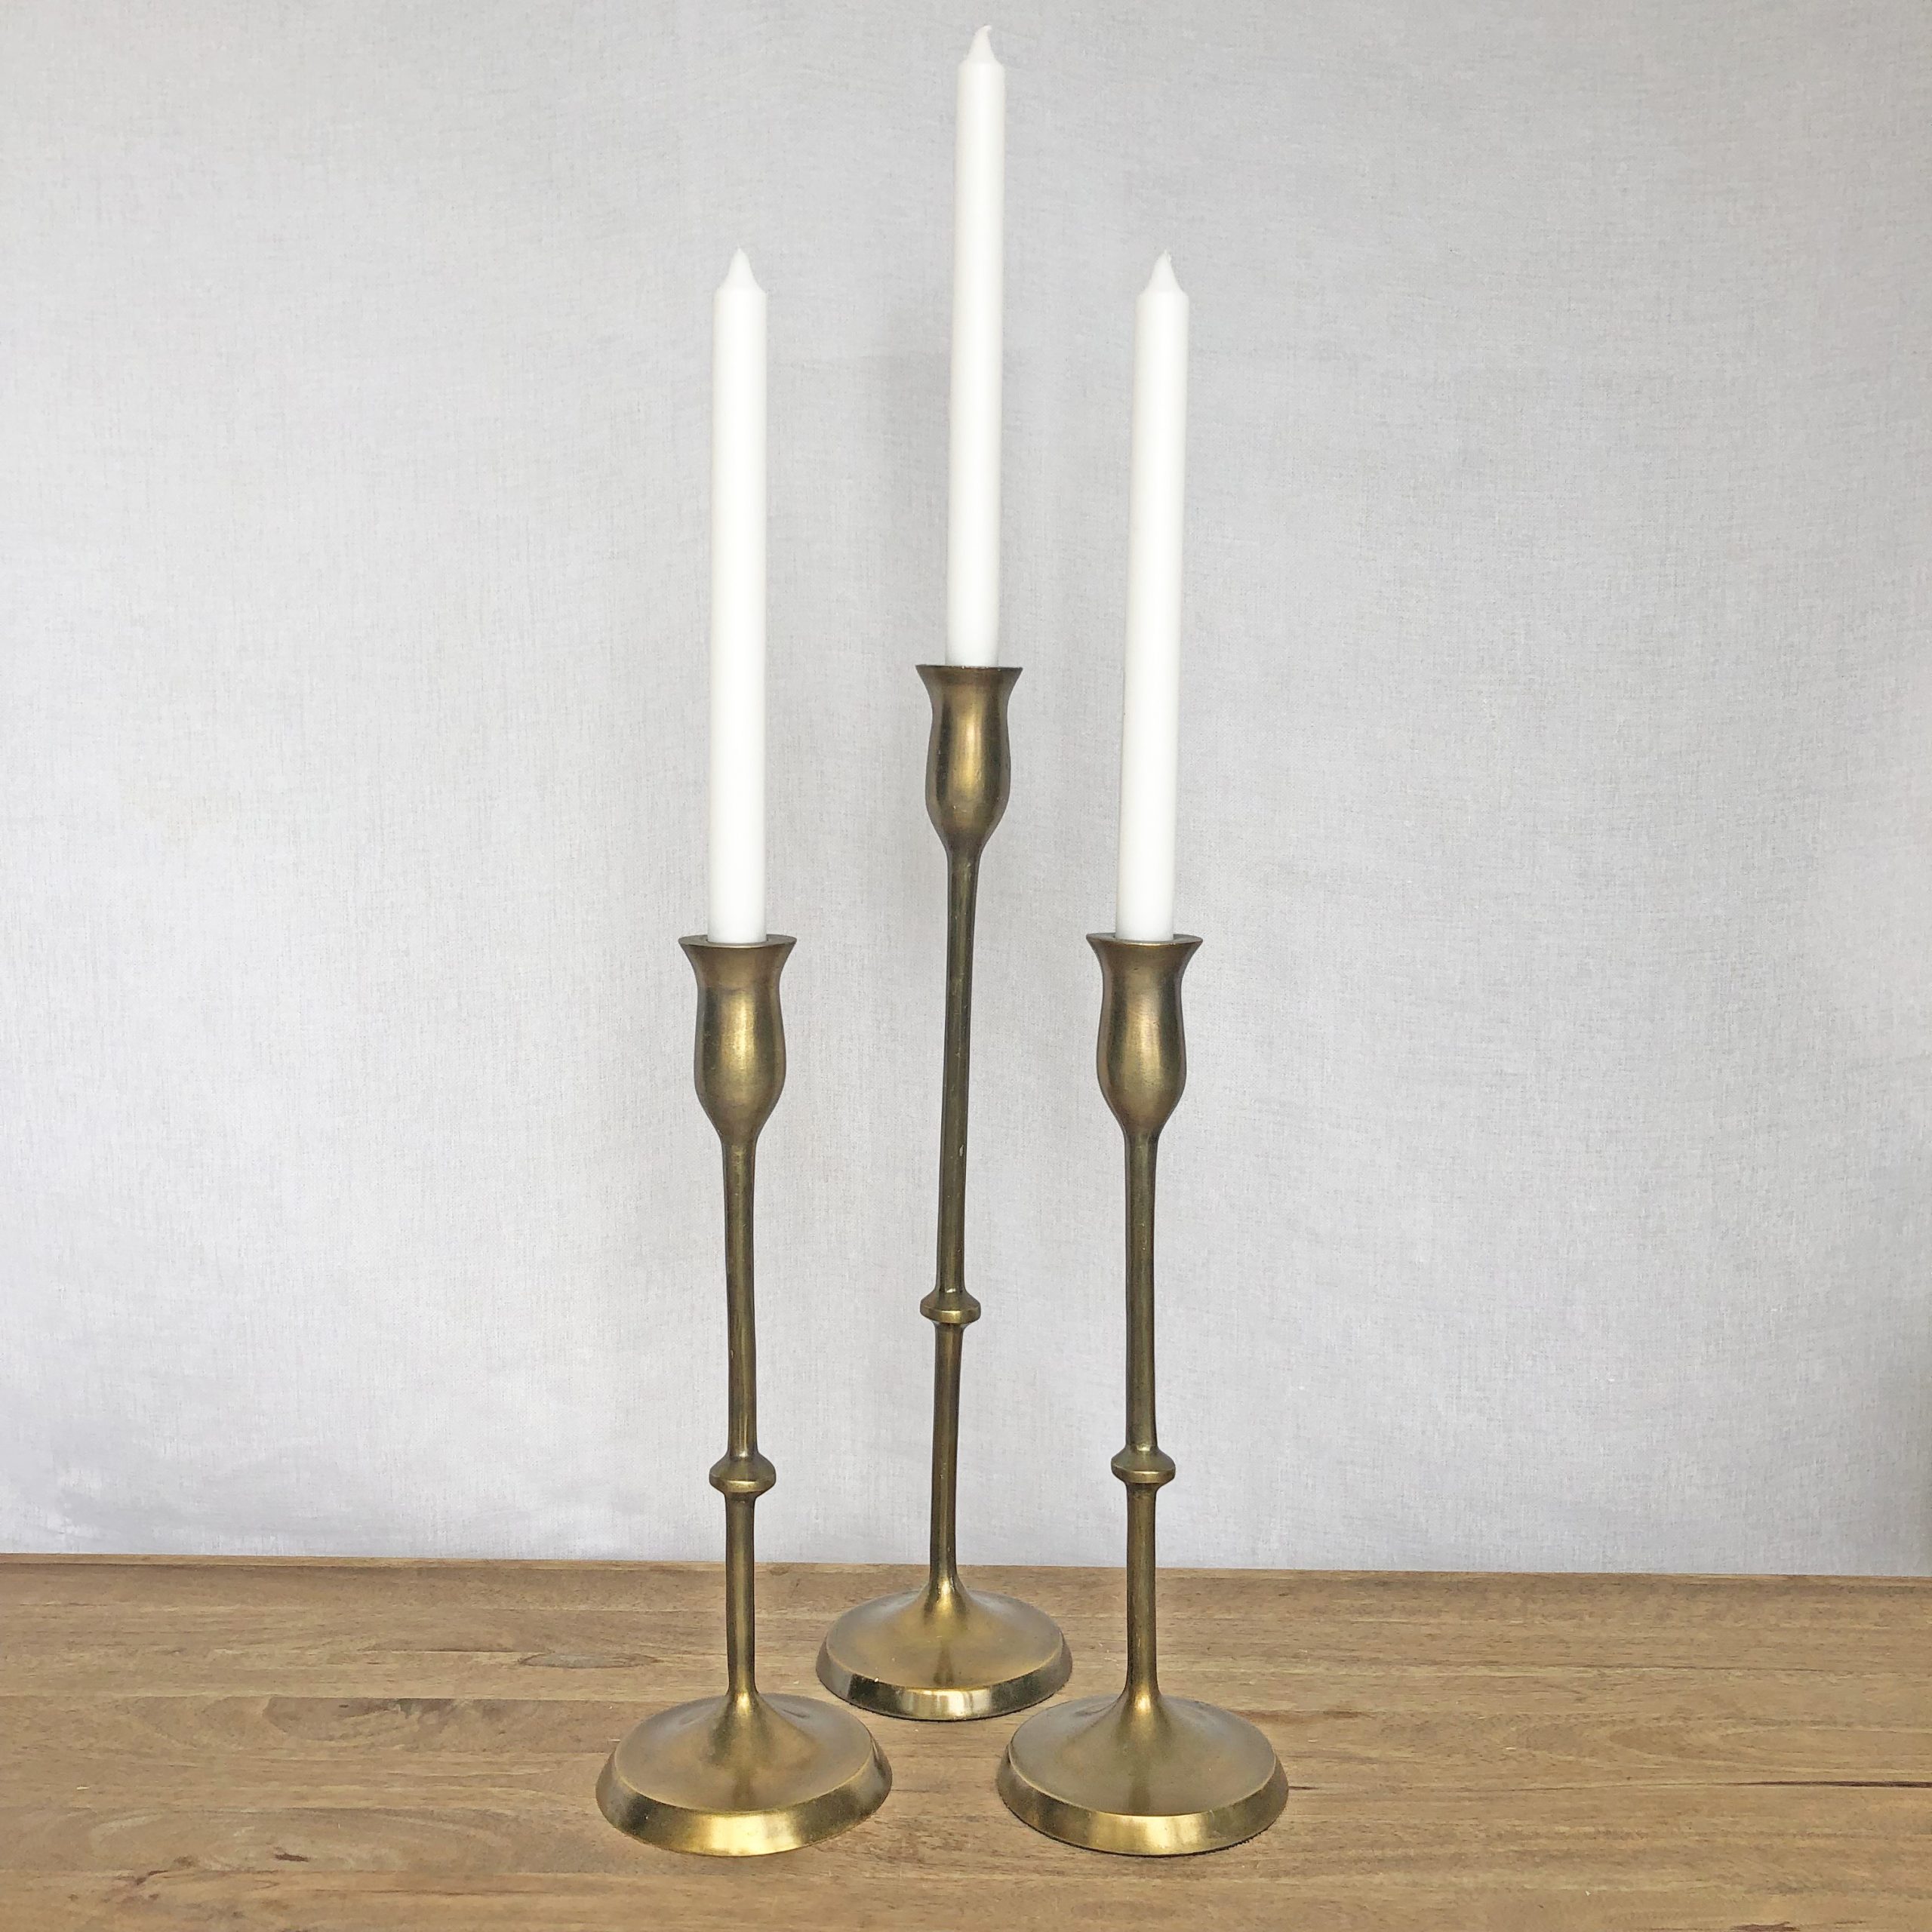 CALI BRASS CANDLE STICK HOLDERS – MEDIUM & SMALL – Be-Designed